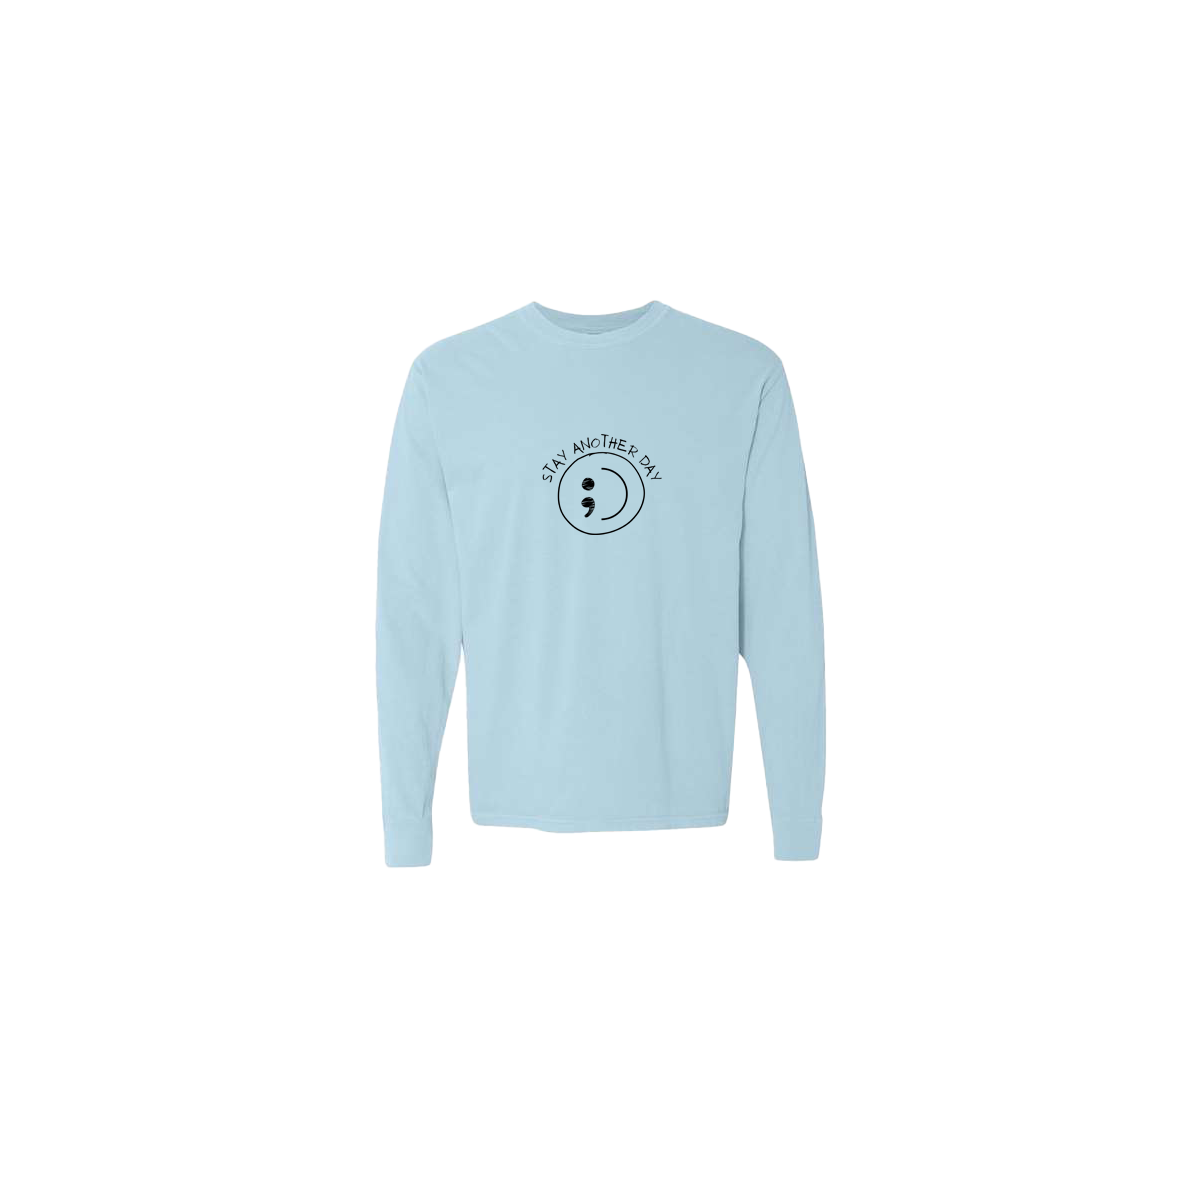 Stay Another Day Smiley Face Embroidered Light Blue Long Sleeve Tshirt - Mental Health Awareness Clothing